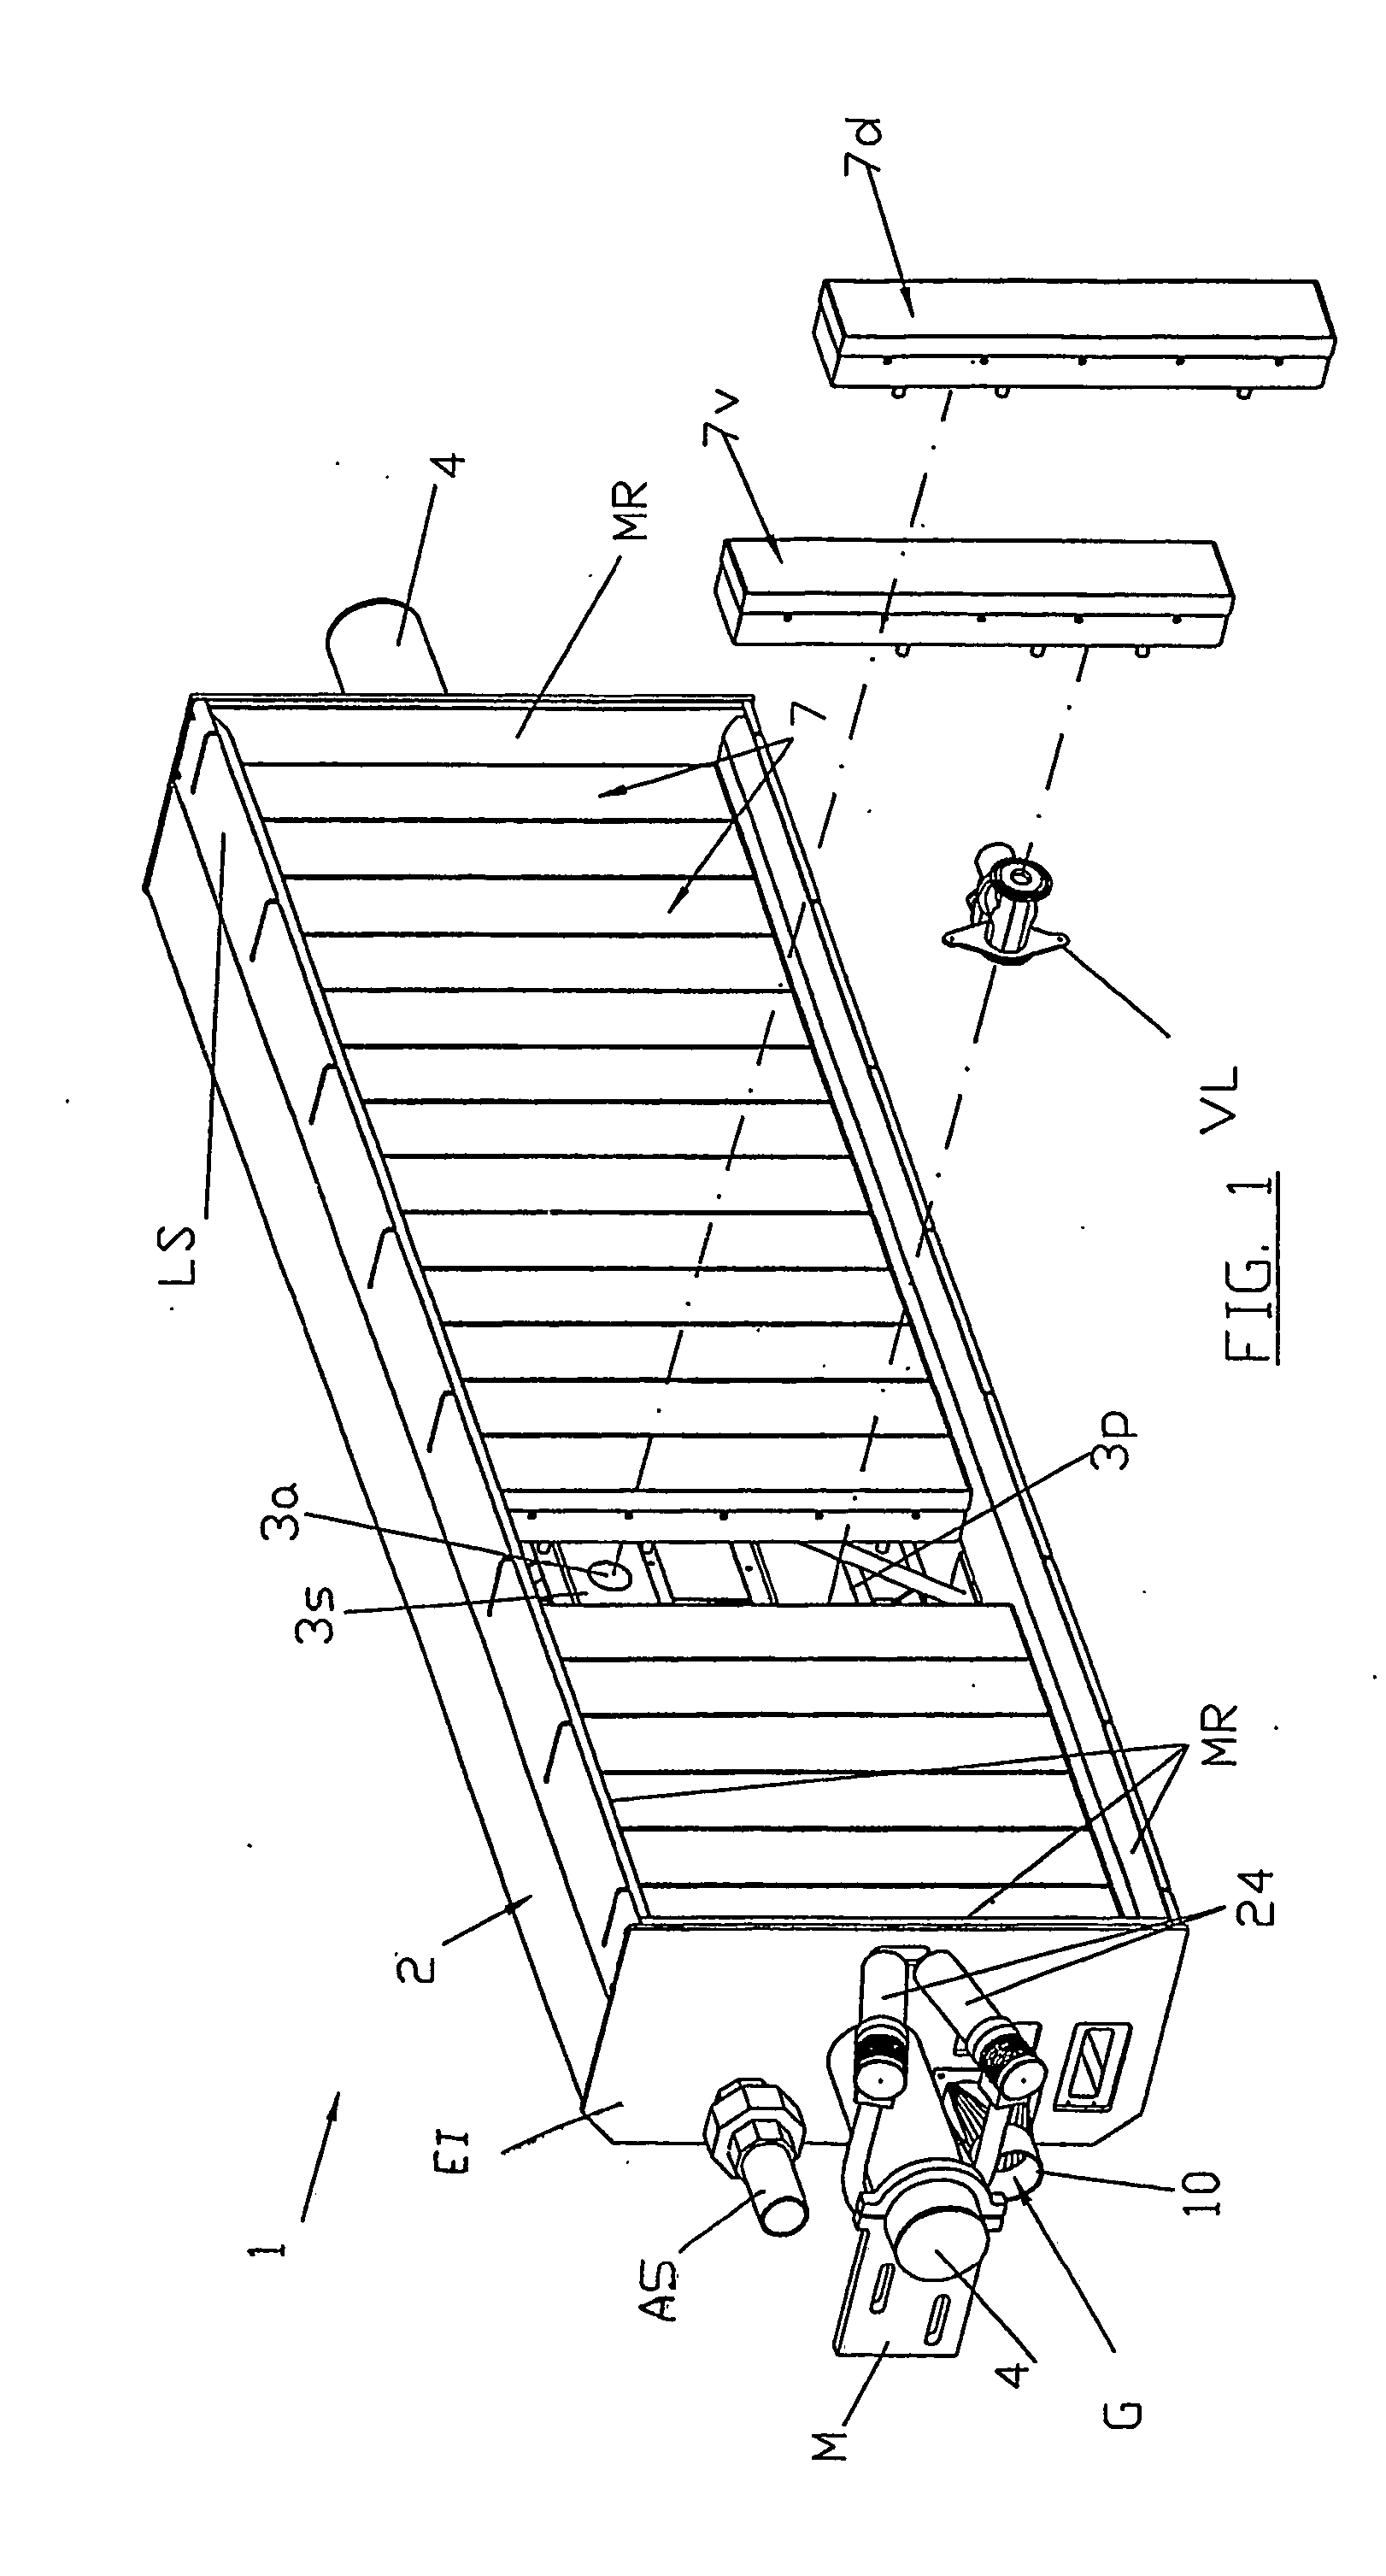 Modular infrared irradiation apparatus and its corresponding monitoring devices